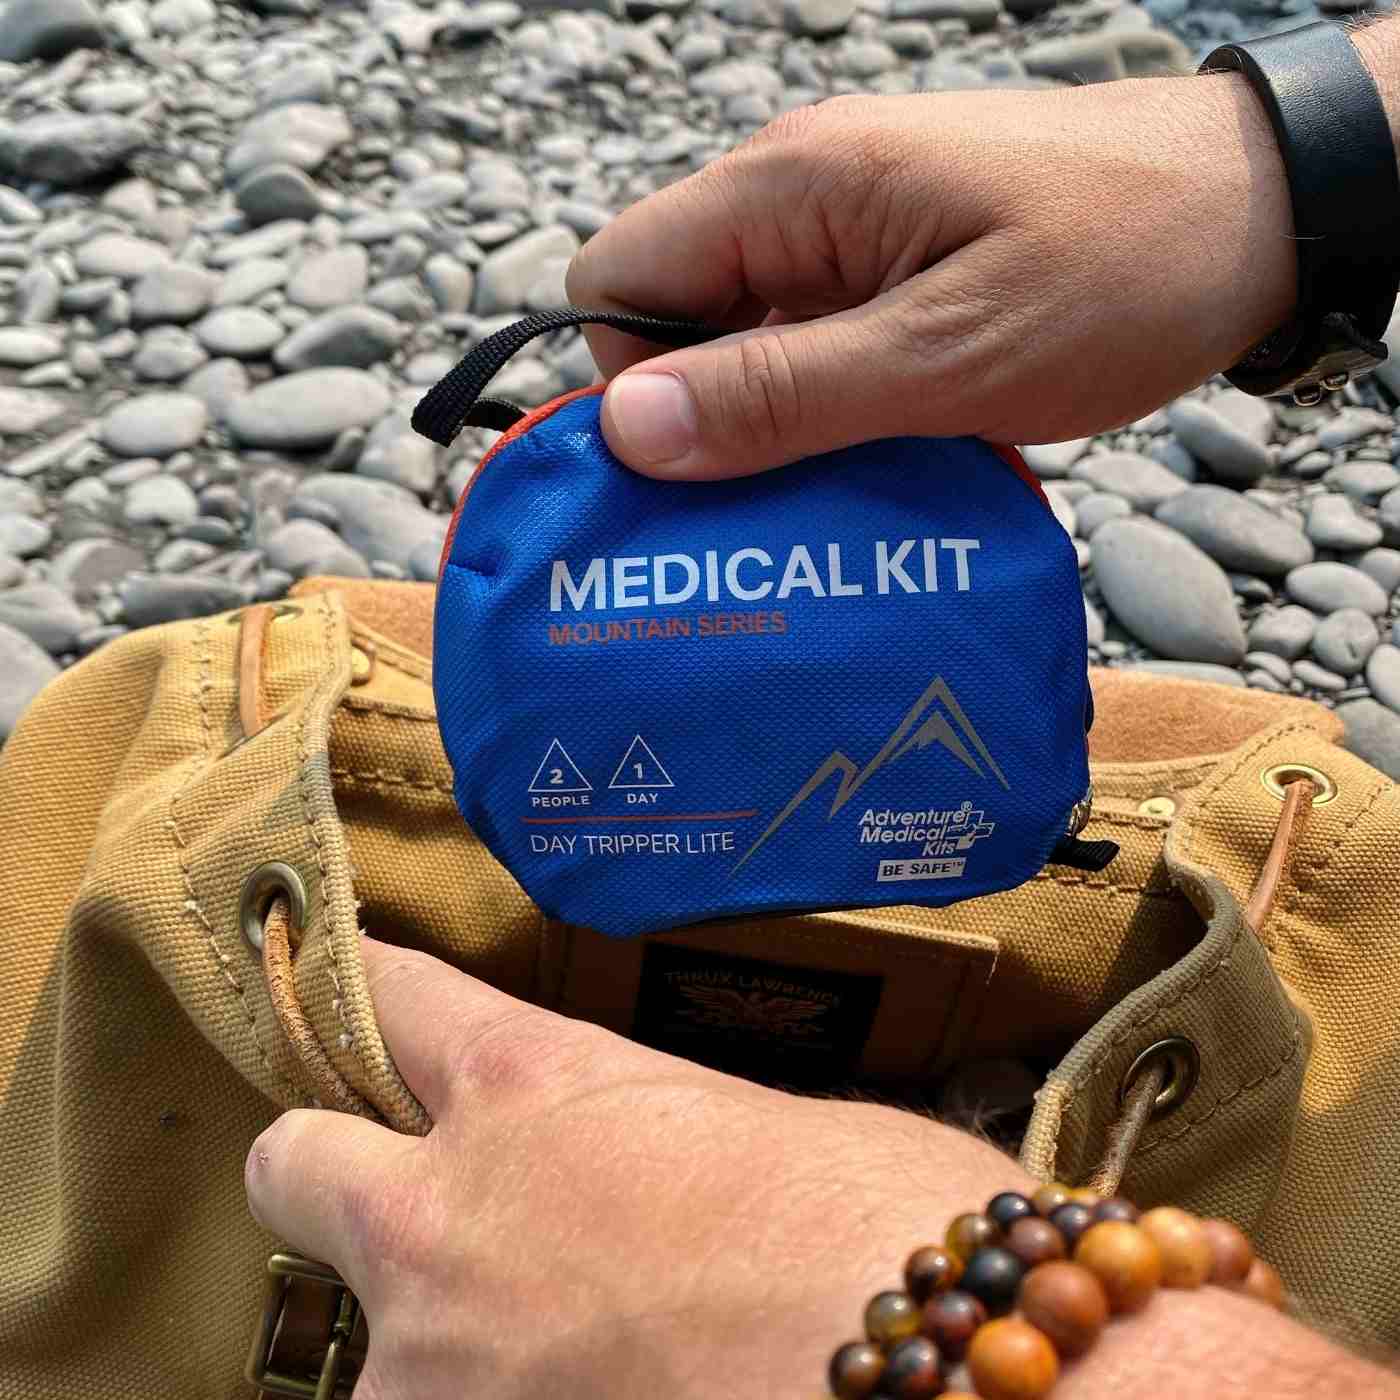 Mountain Series Medical Kit - Day Tripper Lite man pulling kit out of brown backpack on rocky ground